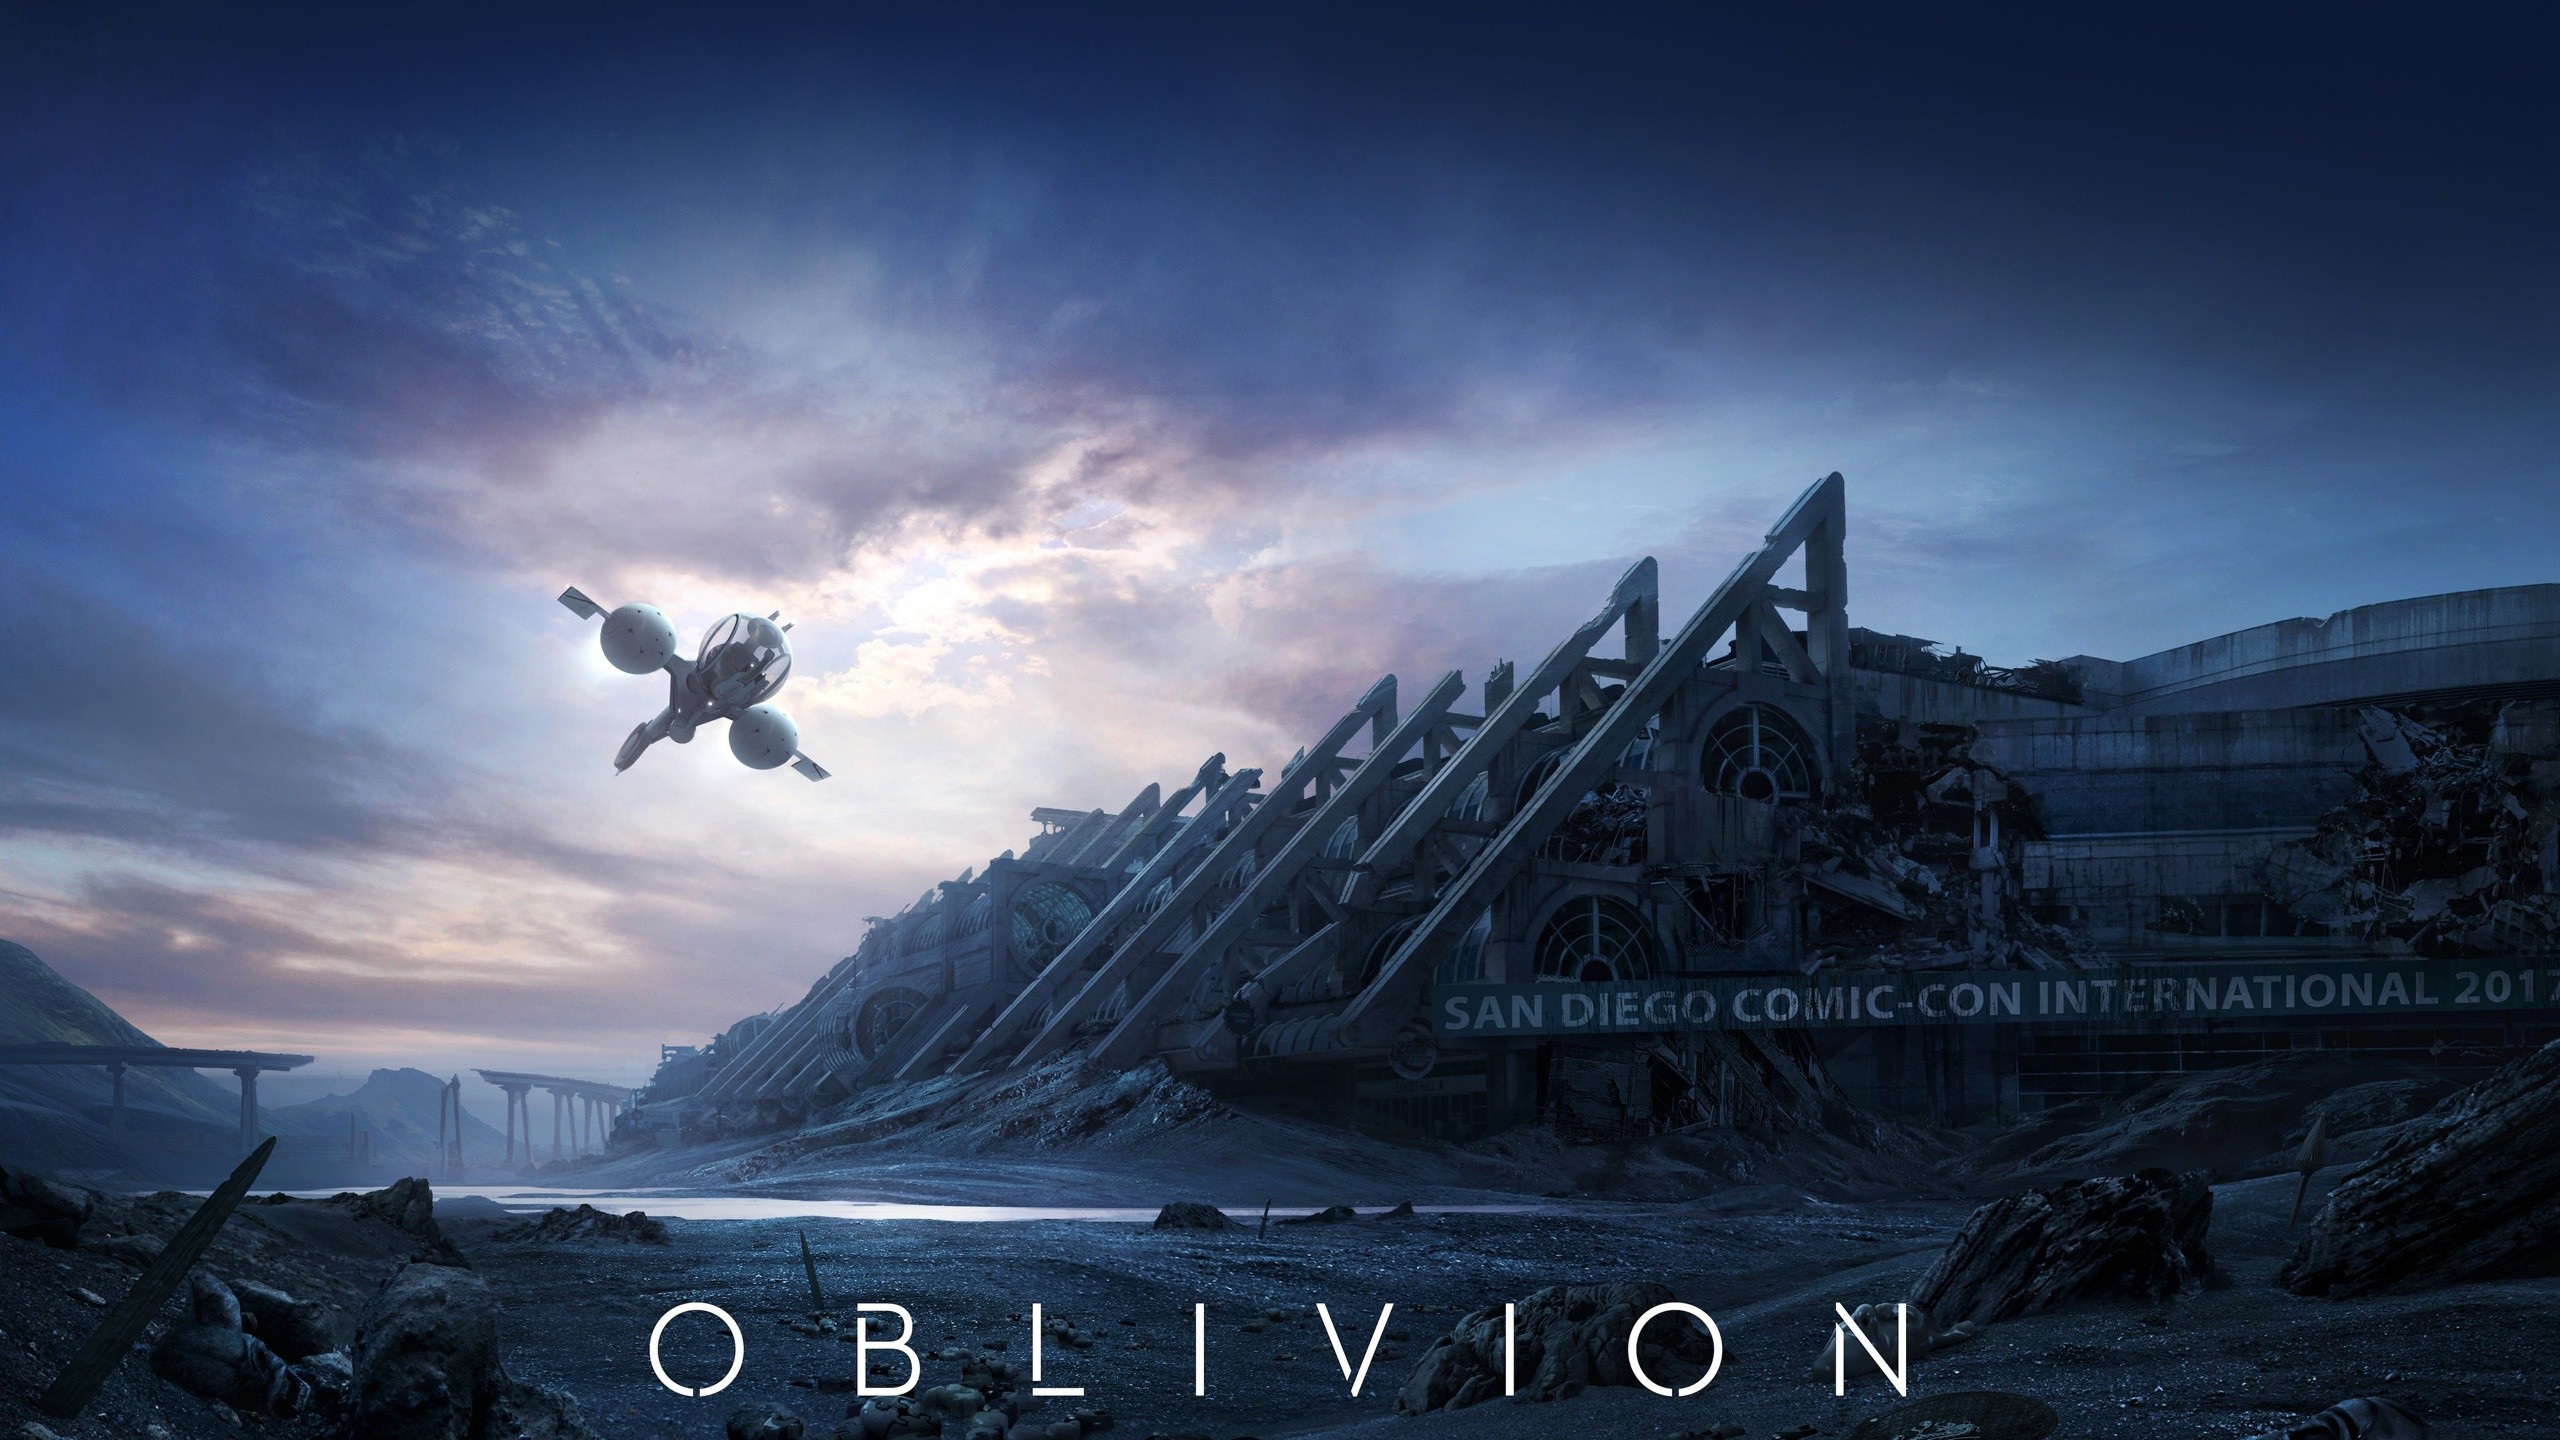 General 2560x1440 Oblivion (movie) movies science fiction Universal Pictures